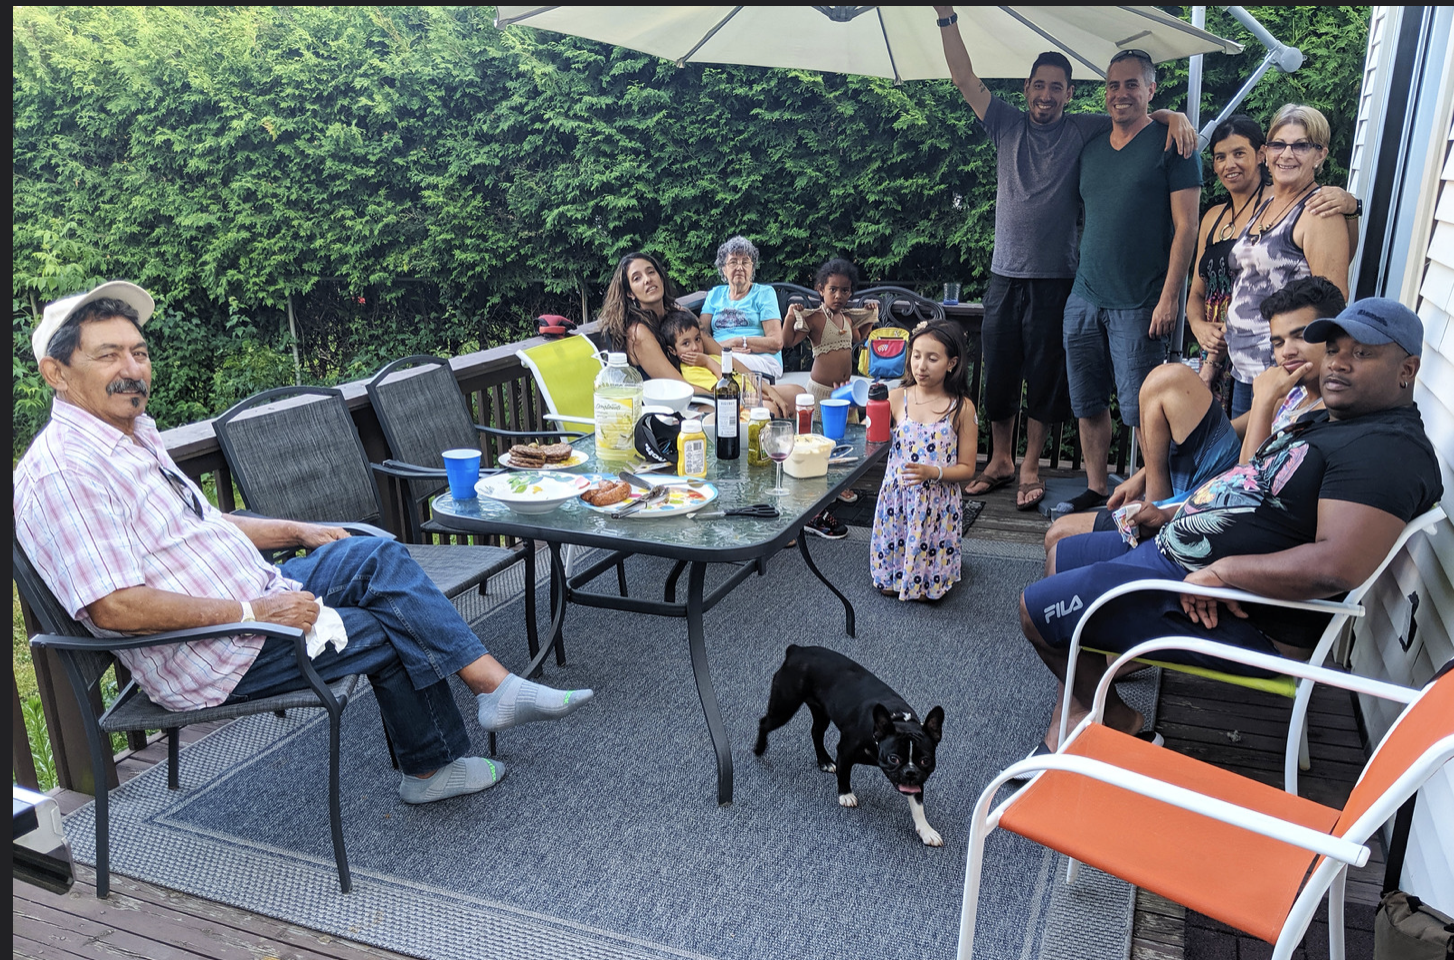 Friends and family enjoying a "decent standard of living" July 6, 2019, Ottawa, Ontario, Canada. (Photo by lezumbalaberenjena) Creative Commons license via Flickr)